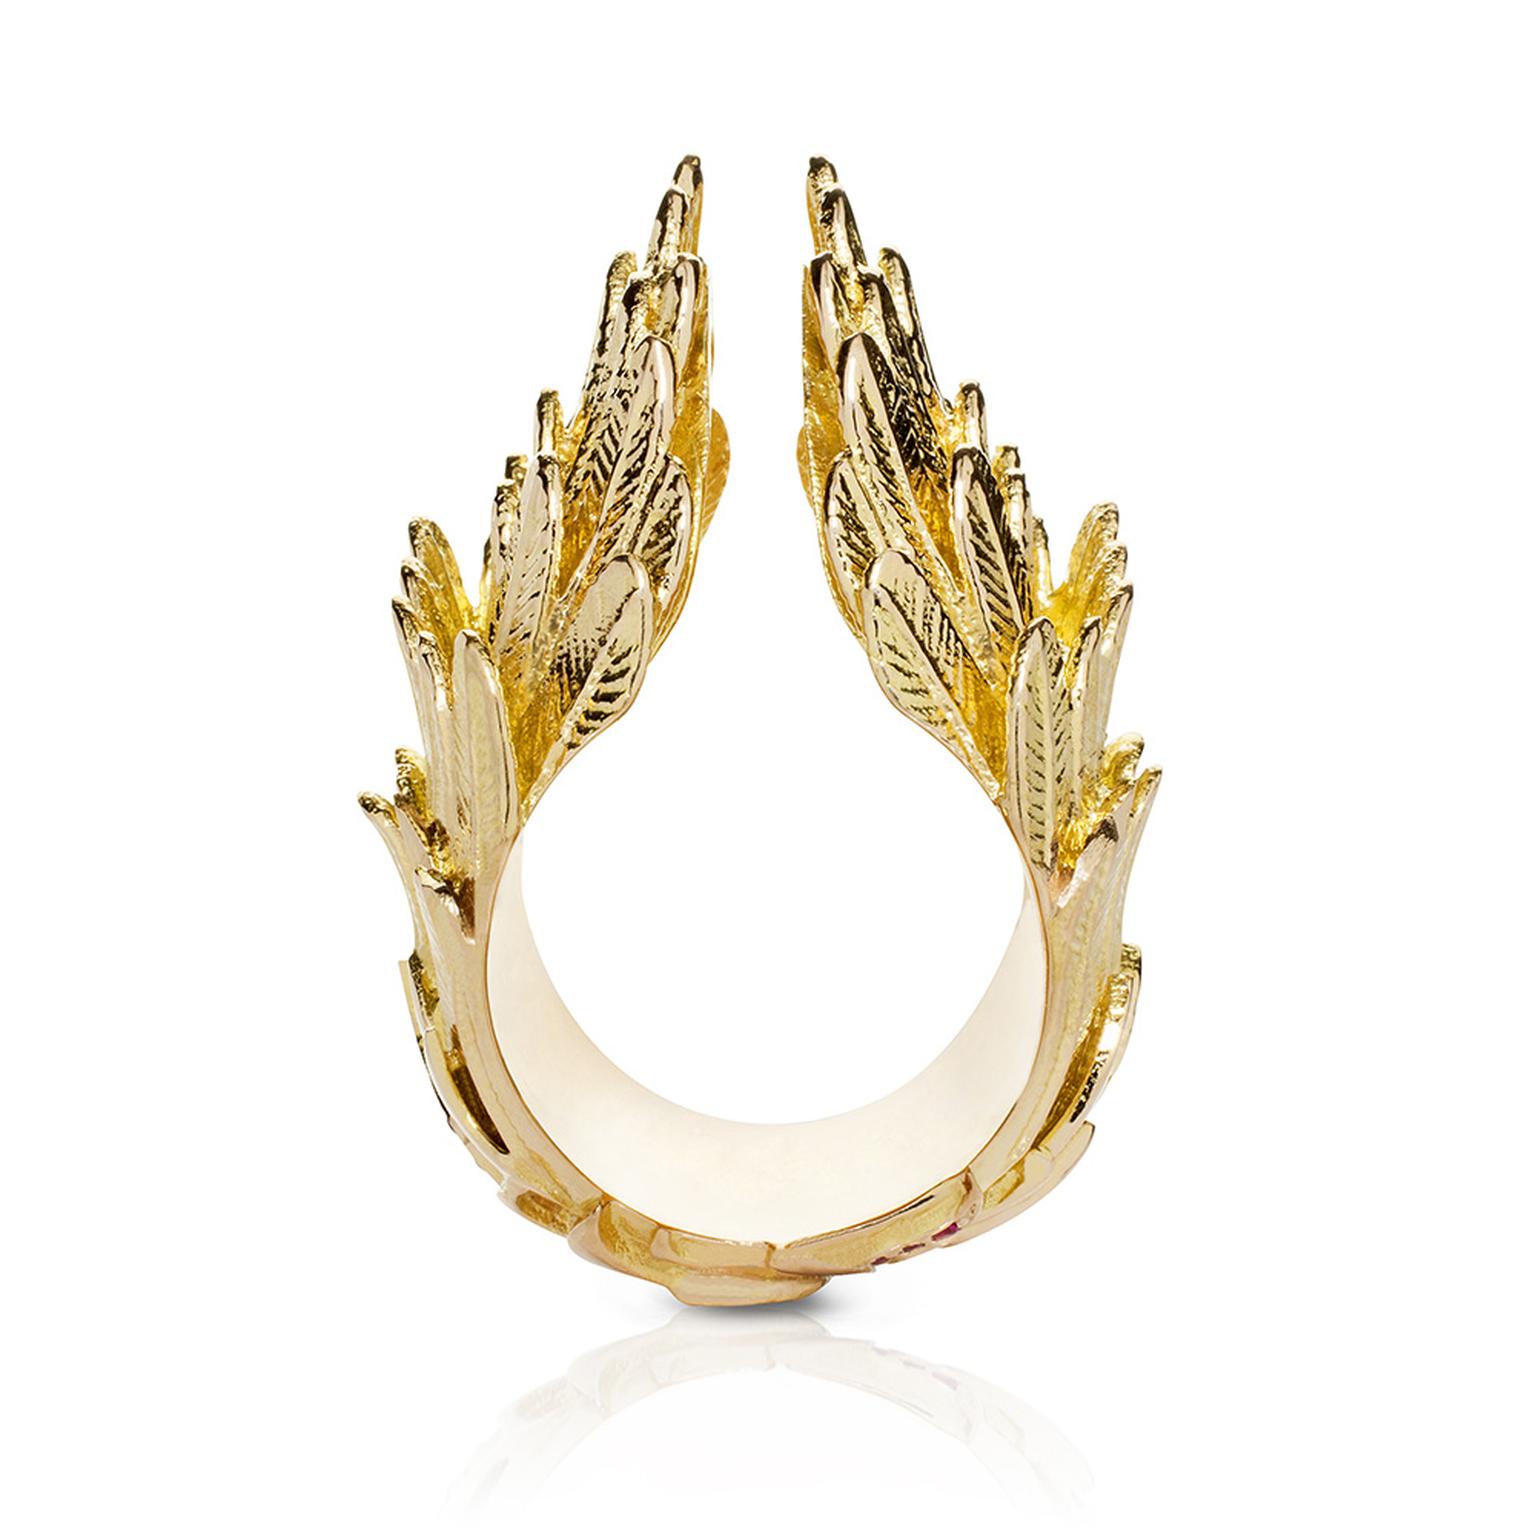 The pioneering designers who are shaking up British jewellery design